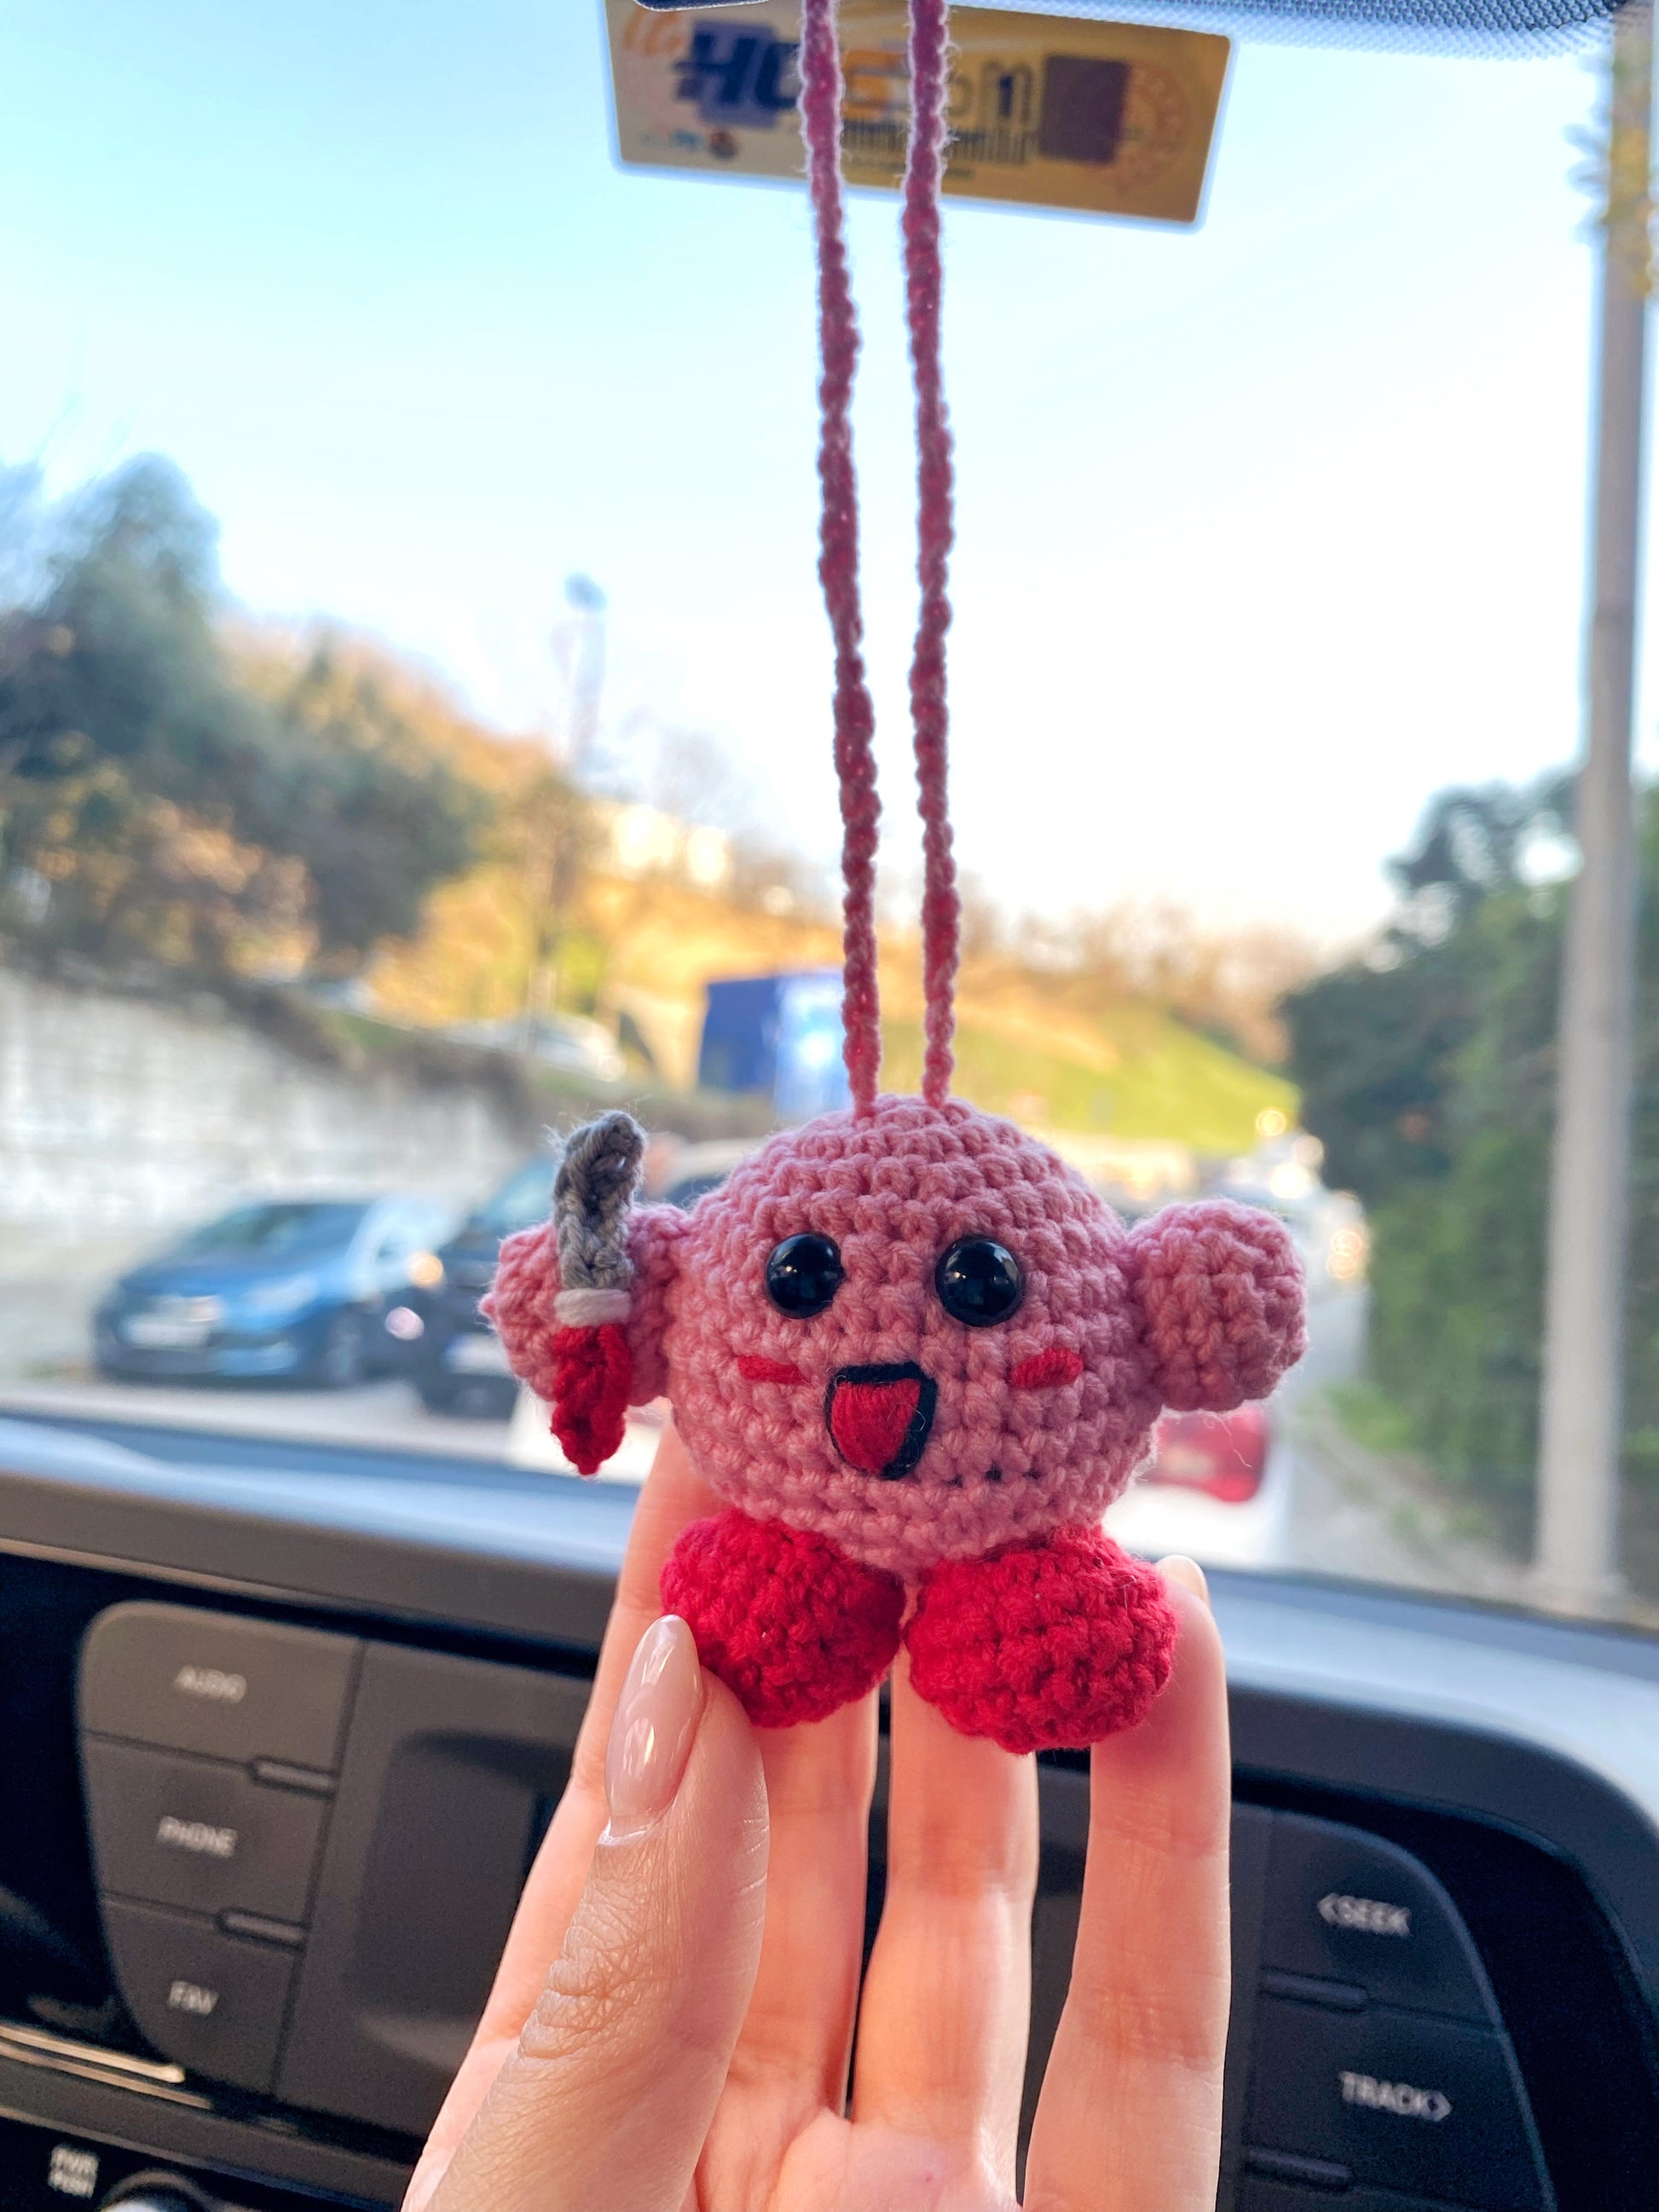 Cute Car Hanging Accessories, Rear View Mirror Charm, Gift for New Car,  Crochet Animal Car Ornament, New Driver Gift, Valentine's Day Gift. 